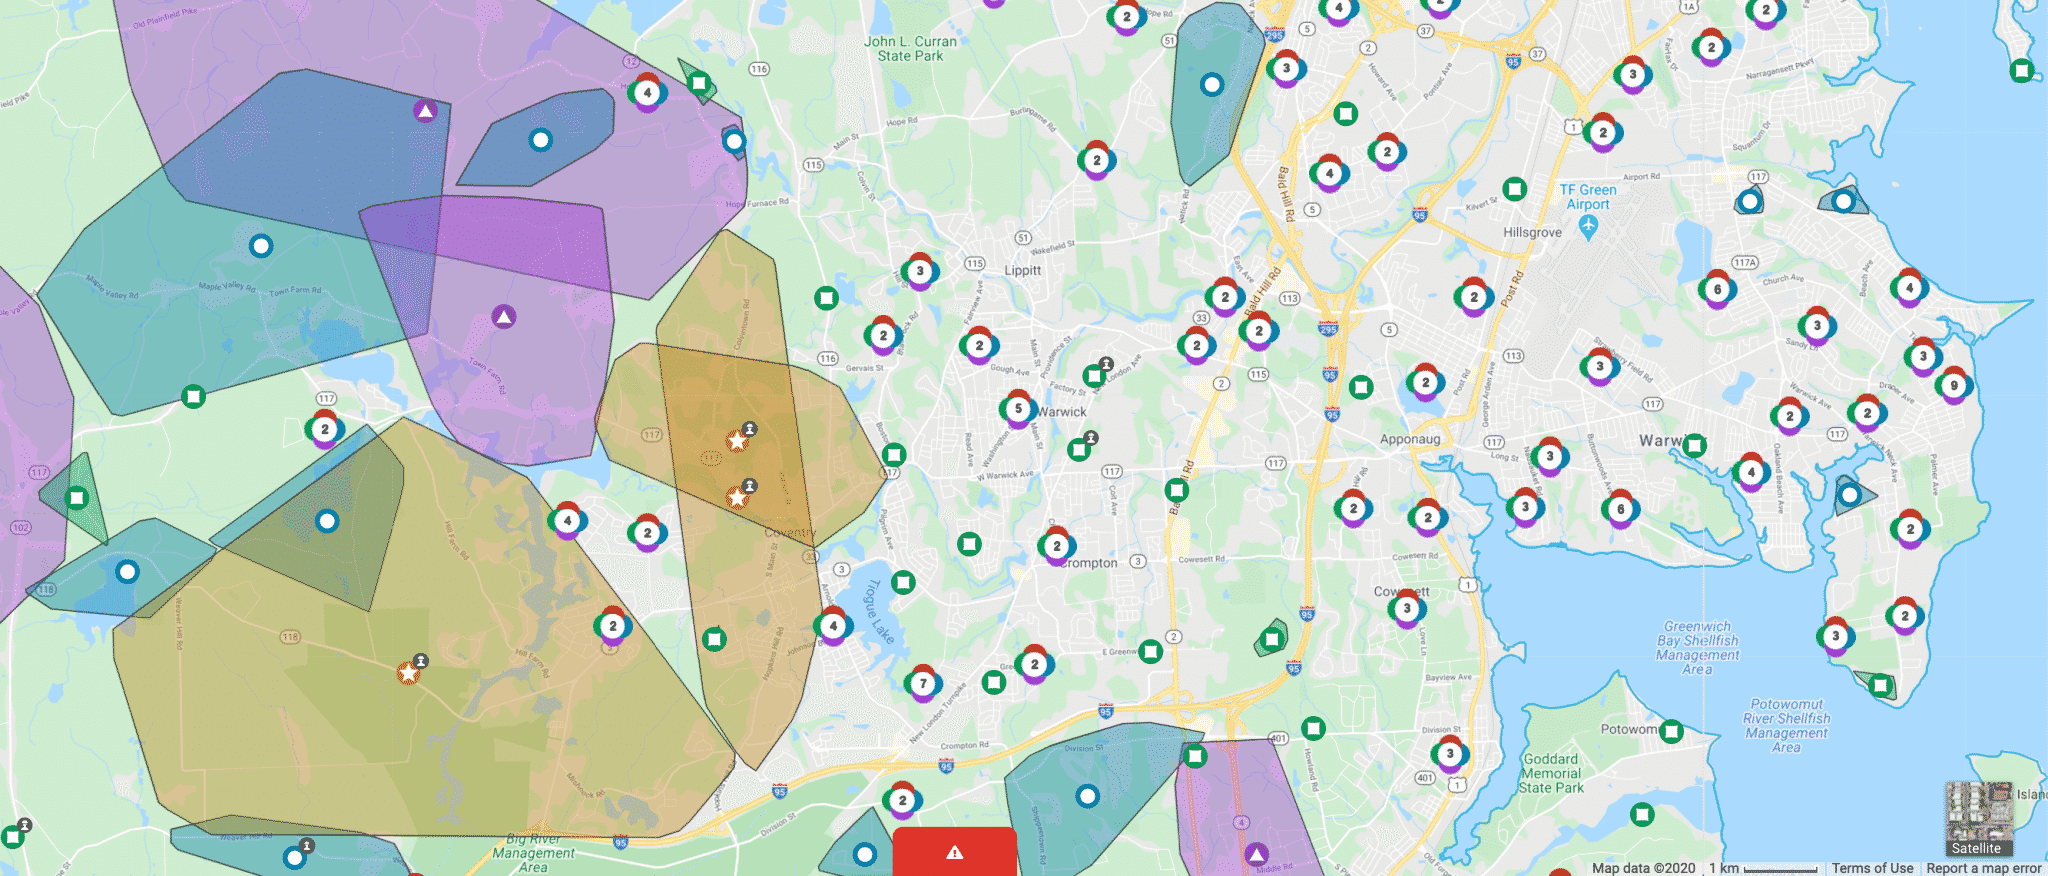 [CREDIT: National Grid] Tropical Storm-Isaias winds knocked out power for several thousand in RI Tuesday, with Coventry and Cranston power grids among those taking the worst of the damage. Power restoration is estimated throughout the area between 2 p.m. today and 12 p.m. Thursday.